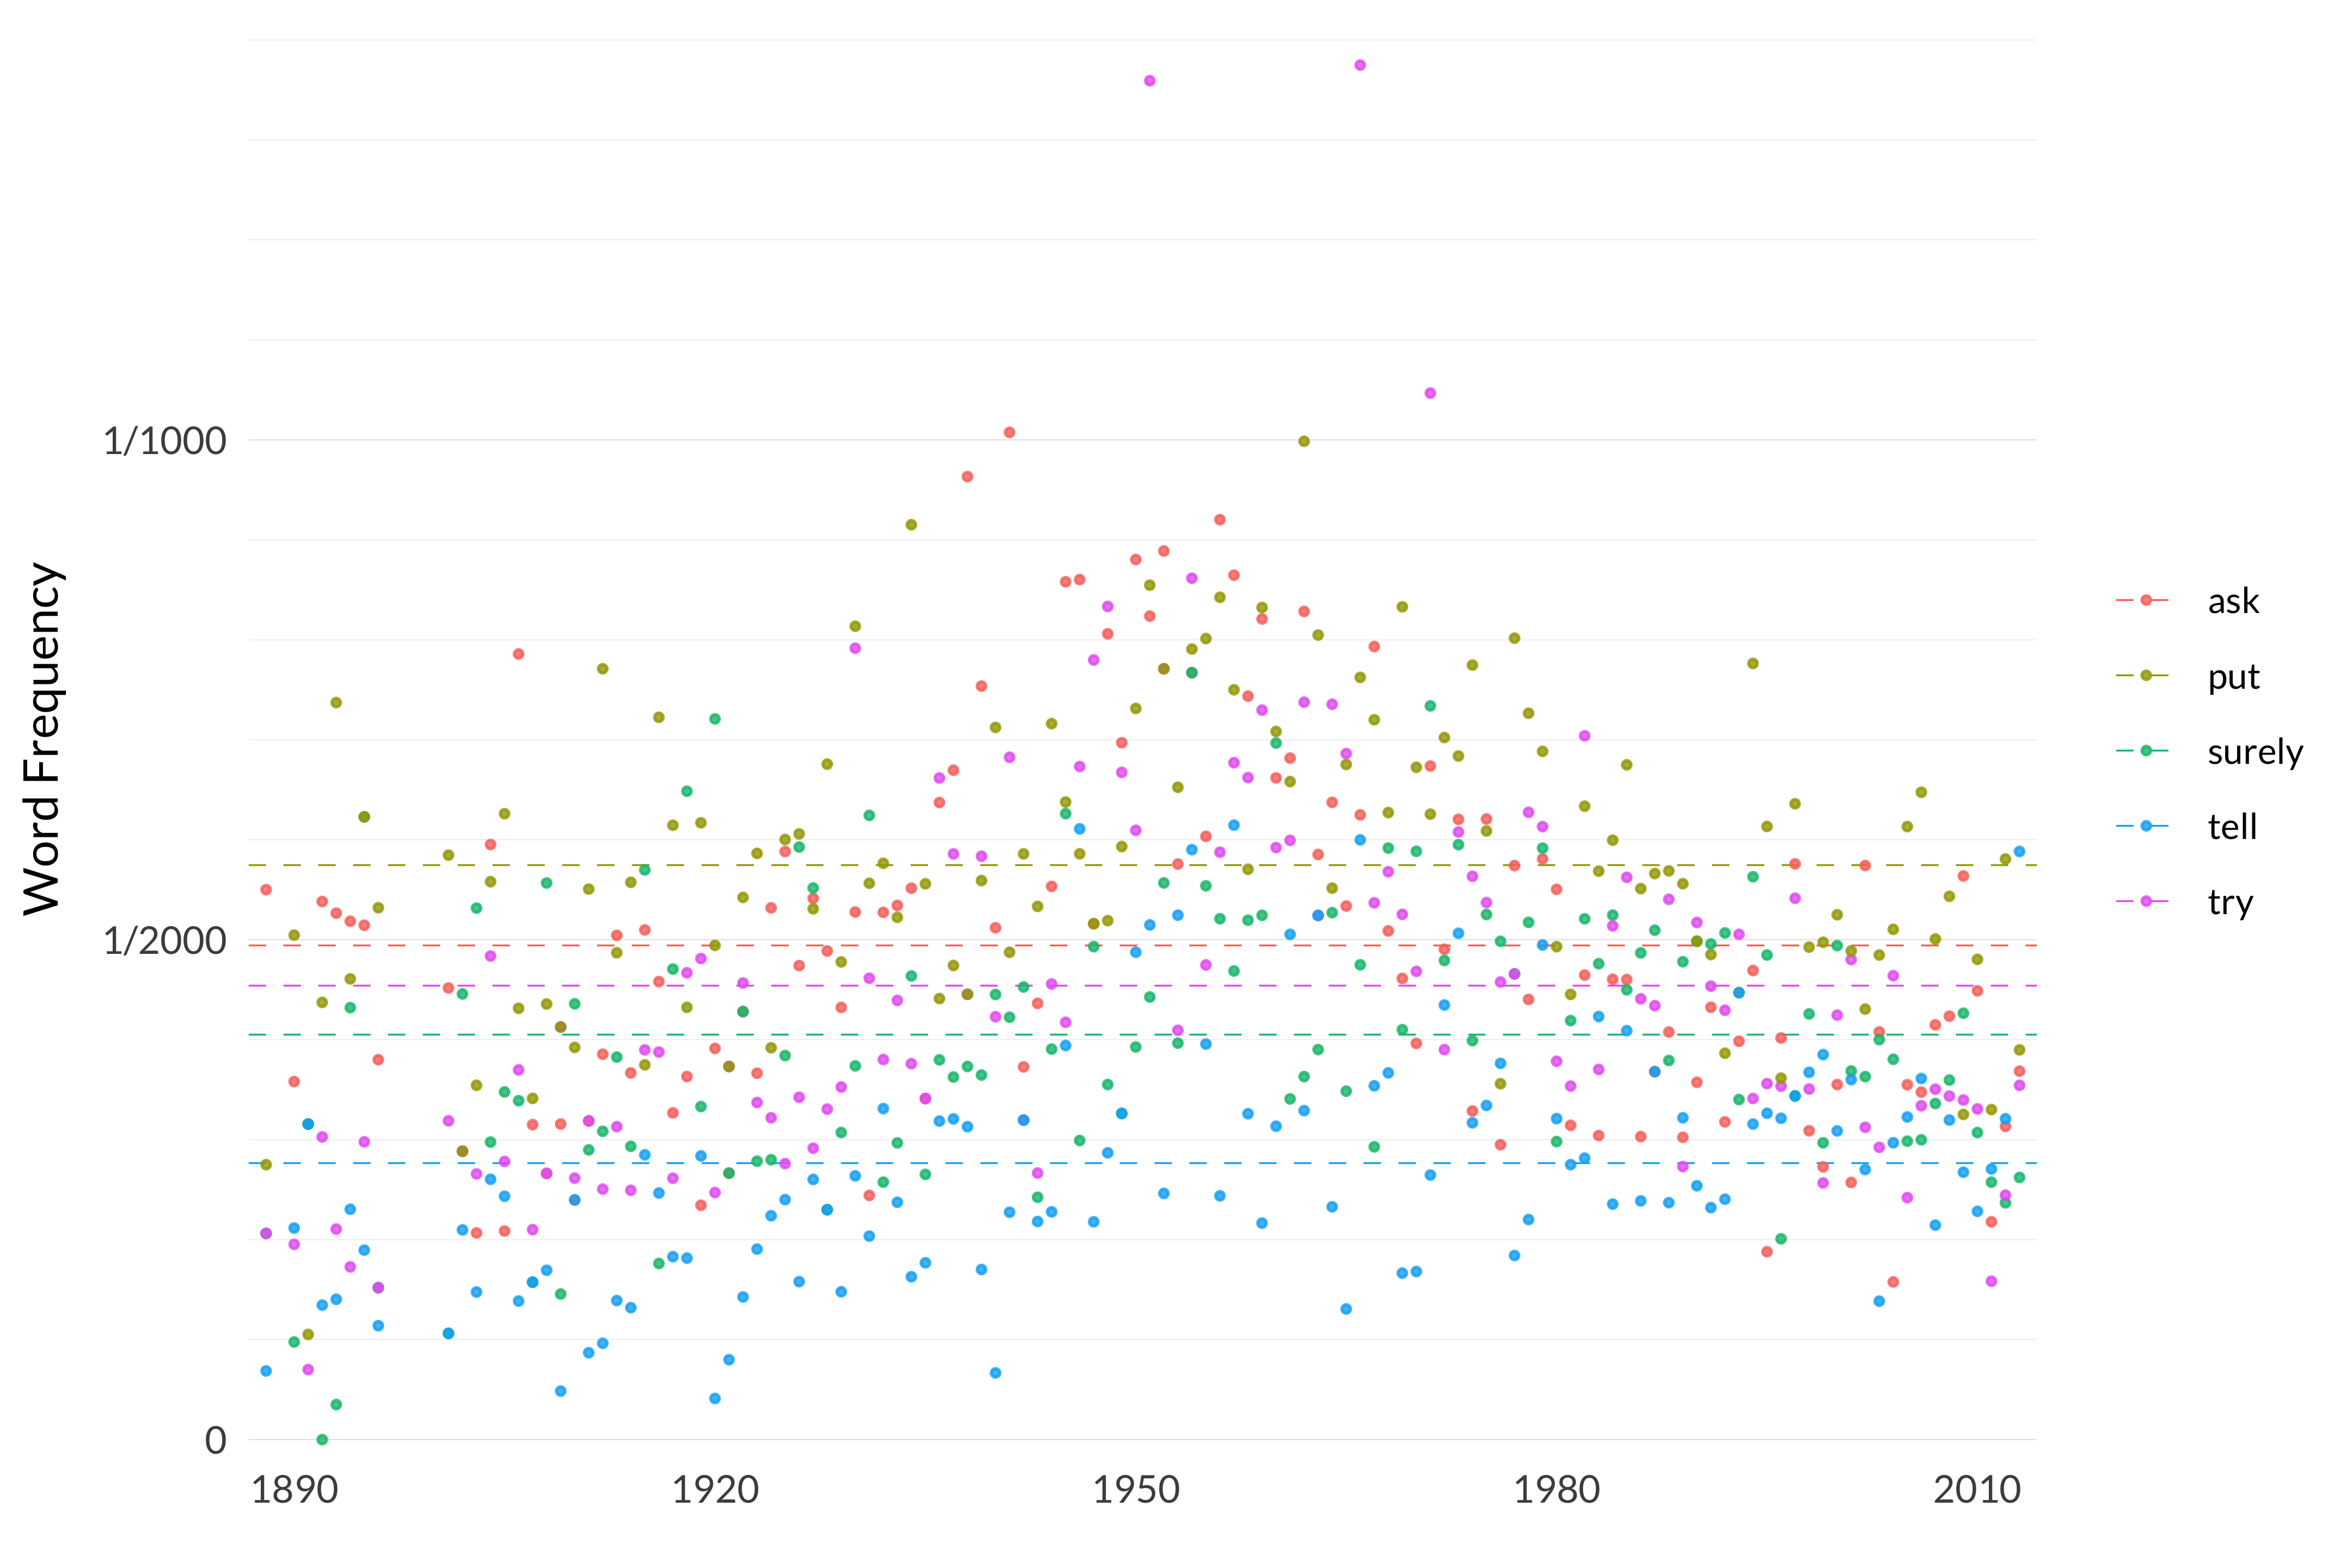 A scatterplot showing the frequency of the words ask, surely, try, put, tell in the journal Proceedings of the Aristotelian Society. (All stats from now on just refer to that journal.) The word ask appears, on average across the years, 494 times per million words, and in the median year, it appears 465 times per million words. Its most frequent occurrence is in 1941 when it appears 1007 times per million words, and its least frequent occurrence is in 2004 when it appears 158 times per million words. The word surely appears, on average across the years, 405 times per million words, and in the median year, it appears 397 times per million words. Its most frequent occurrence is in 1954 when it appears 767 times per million words, and its least frequent occurrence is in 1892 when it appears 0 times per million words. The word try appears, on average across the years, 454 times per million words, and in the median year, it appears 417 times per million words. Its most frequent occurrence is in 1966 when it appears 1375 times per million words, and its least frequent occurrence is in 1891 when it appears 70 times per million words. The word put appears, on average across the years, 575 times per million words, and in the median year, it appears 566 times per million words. Its most frequent occurrence is in 1962 when it appears 999 times per million words, and its least frequent occurrence is in 1891 when it appears 105 times per million words. The word tell appears, on average across the years, 277 times per million words, and in the median year, it appears 260 times per million words. Its most frequent occurrence is in 1957 when it appears 615 times per million words, and its least frequent occurrence is in 1920 when it appears 41 times per million words. 